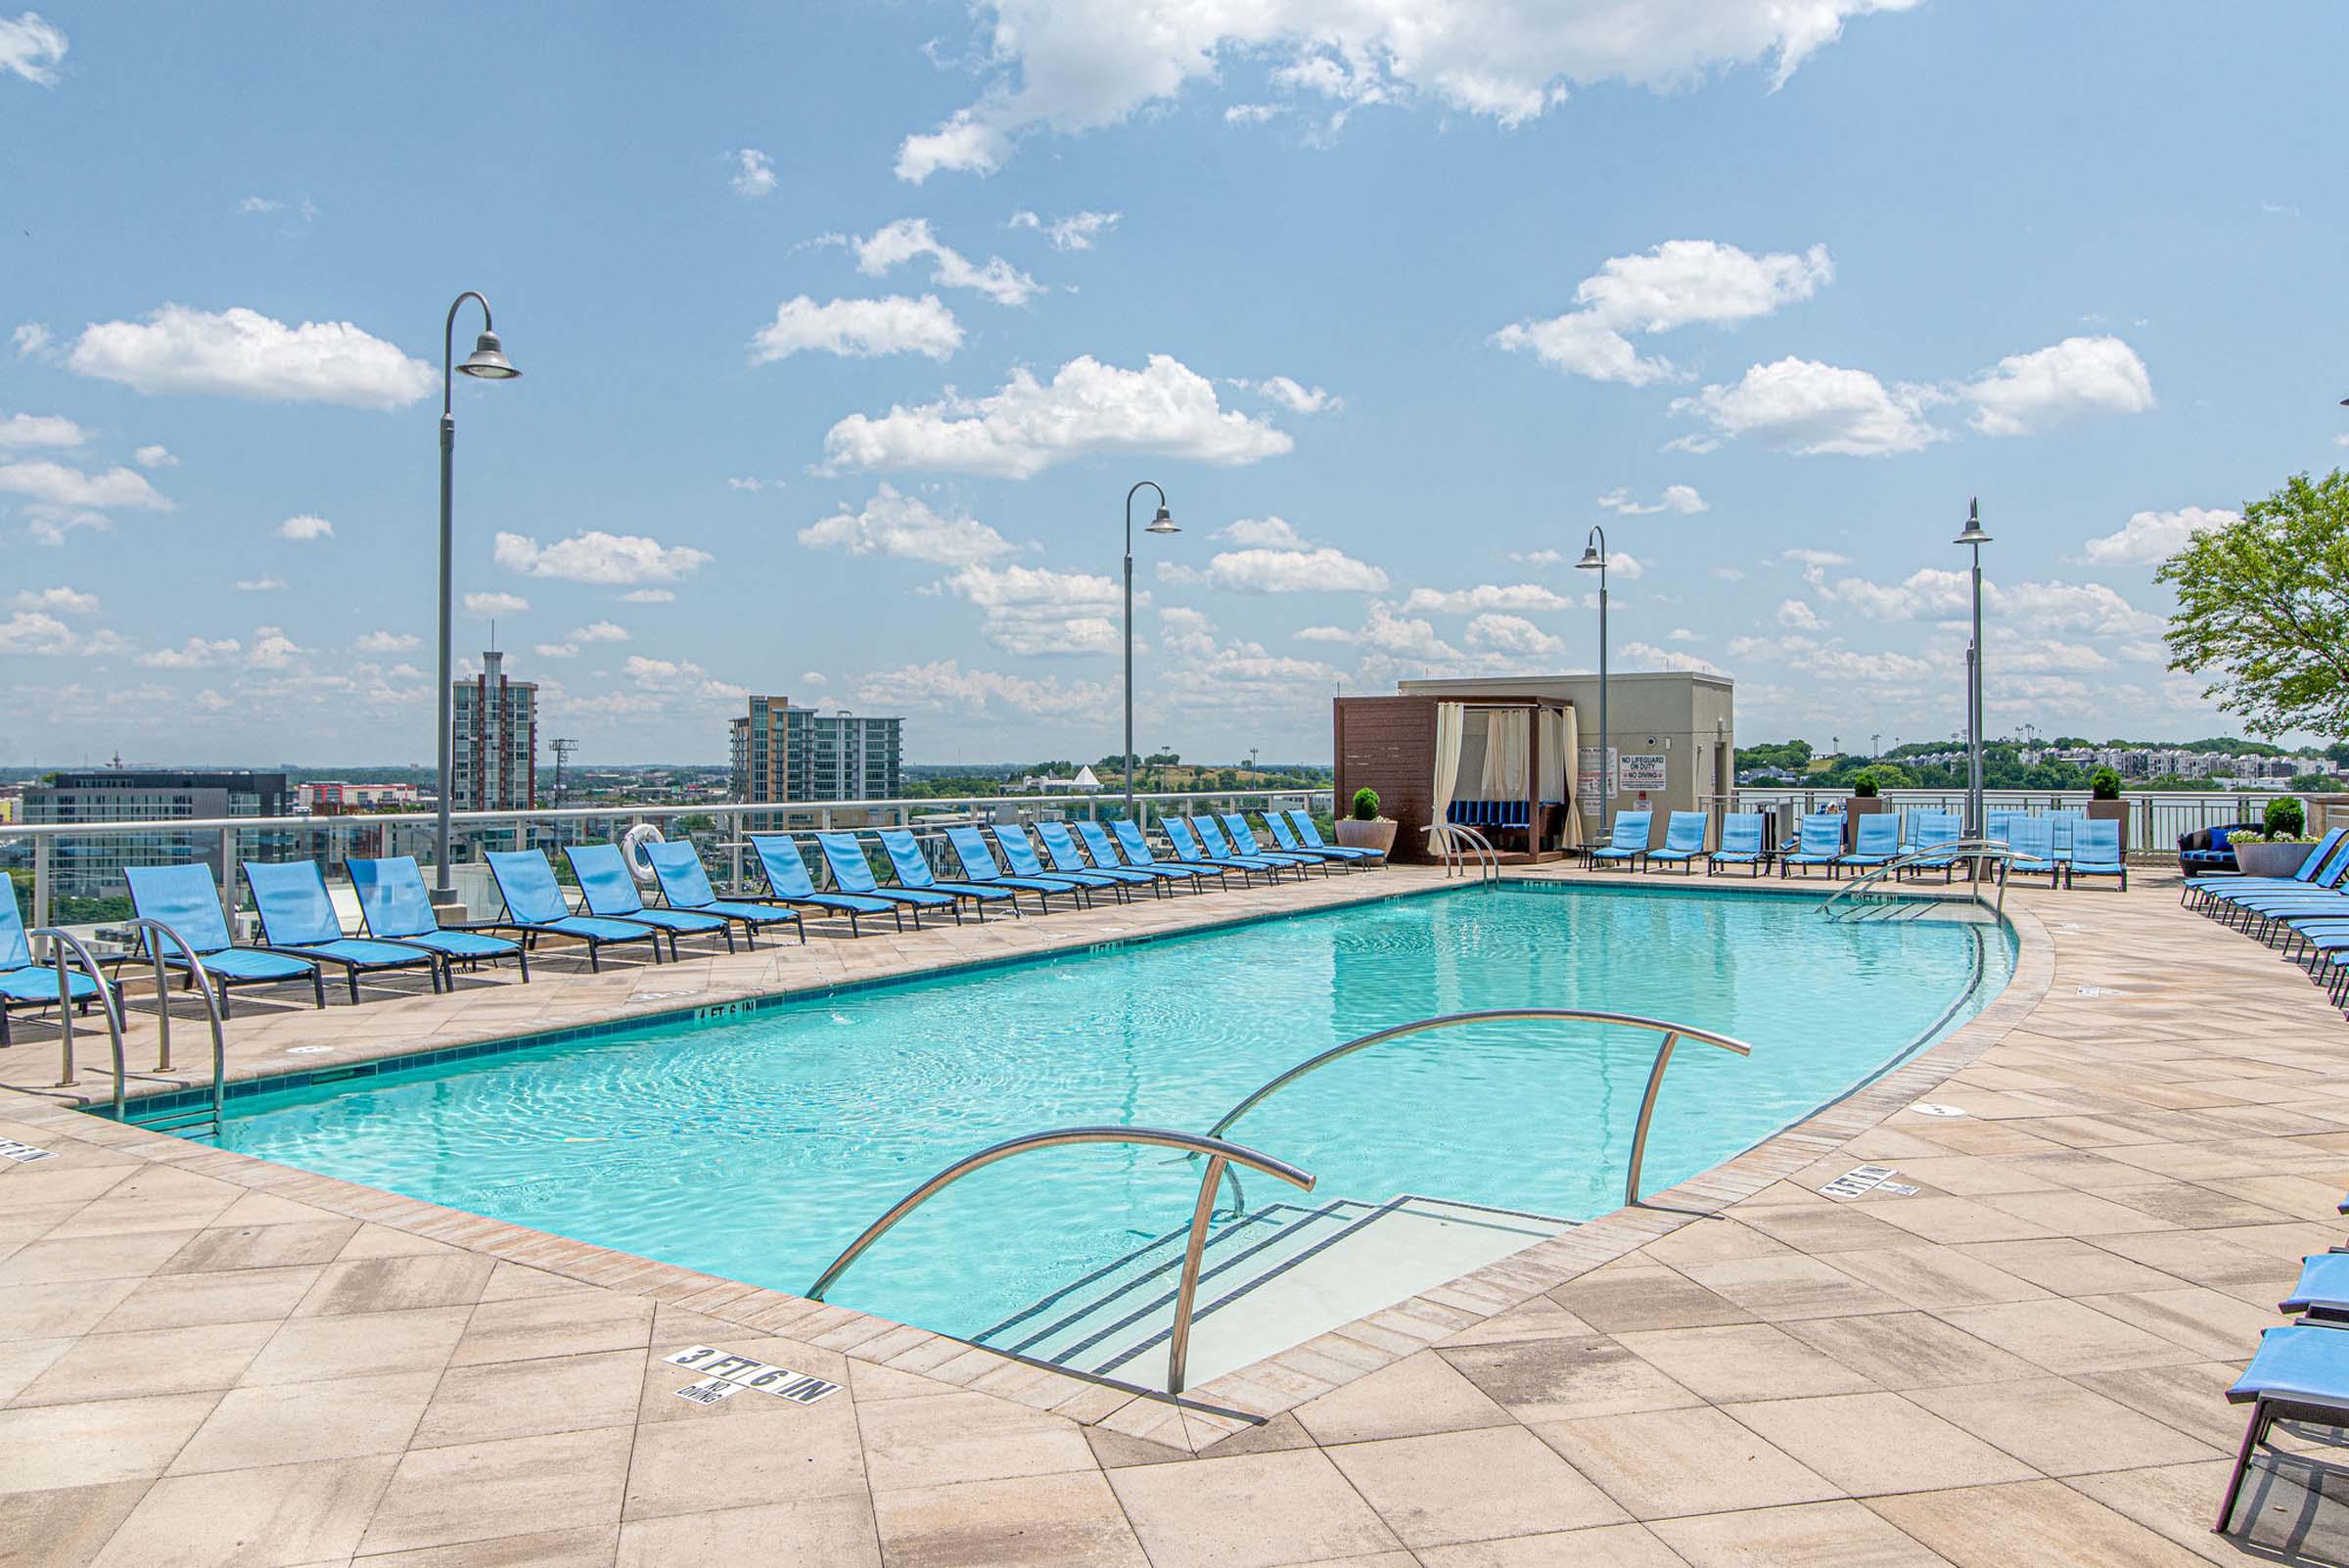 Rooftop pool with lounge seating